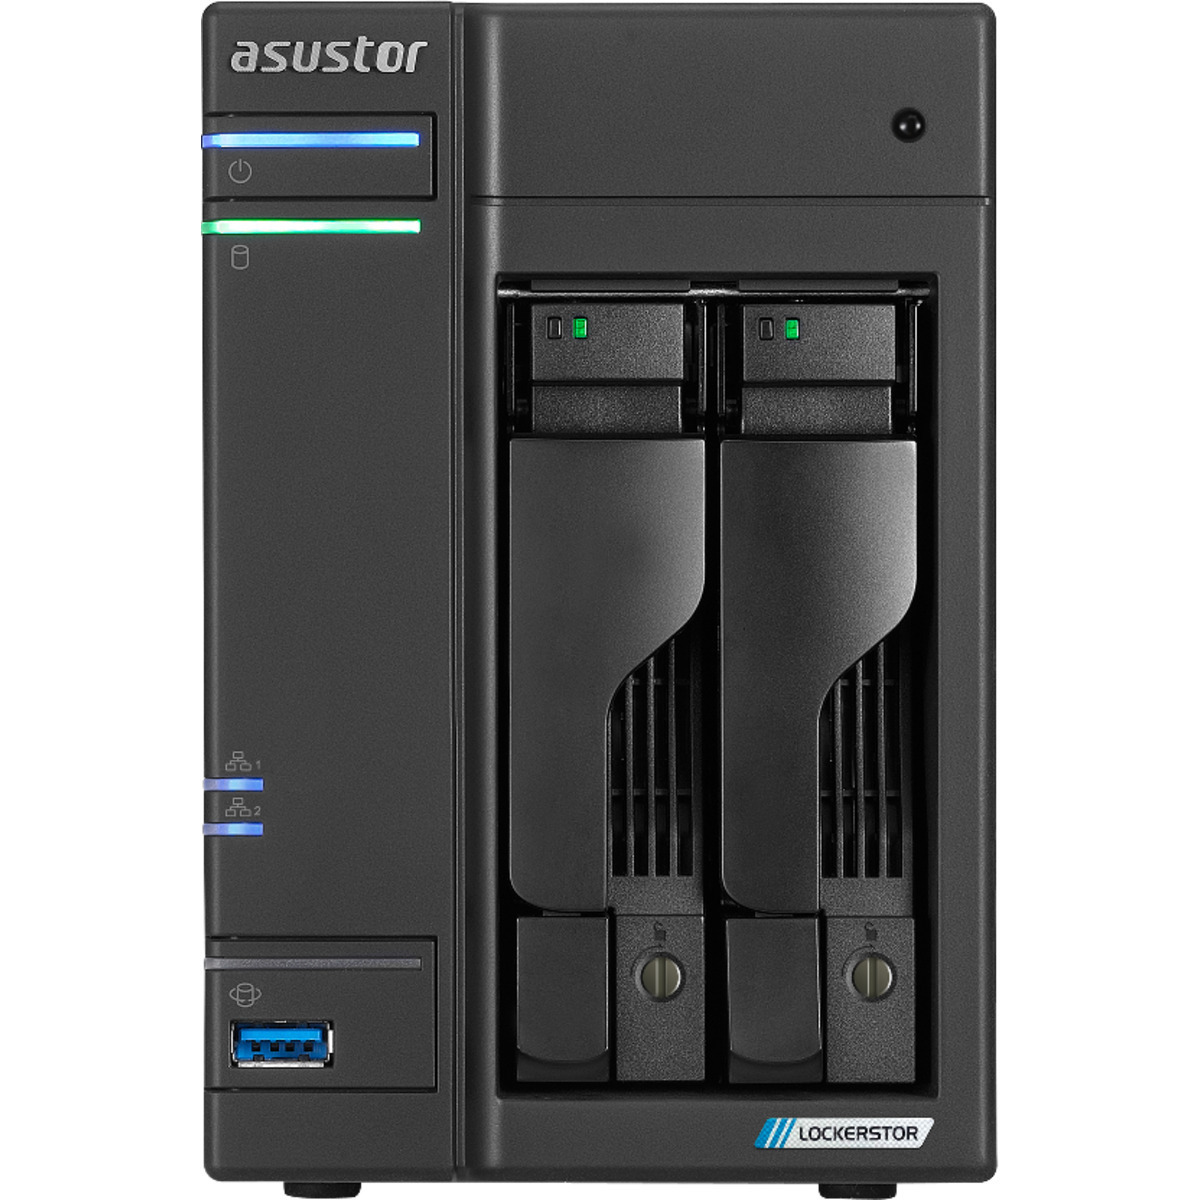 ASUSTOR LOCKERSTOR 2 Gen2 AS6702T 12tb 2-Bay Desktop Multimedia / Power User / Business NAS - Network Attached Storage Device 2x6tb Seagate IronWolf Pro ST6000NT001 3.5 7200rpm SATA 6Gb/s HDD NAS Class Drives Installed - Burn-In Tested - FREE RAM UPGRADE LOCKERSTOR 2 Gen2 AS6702T